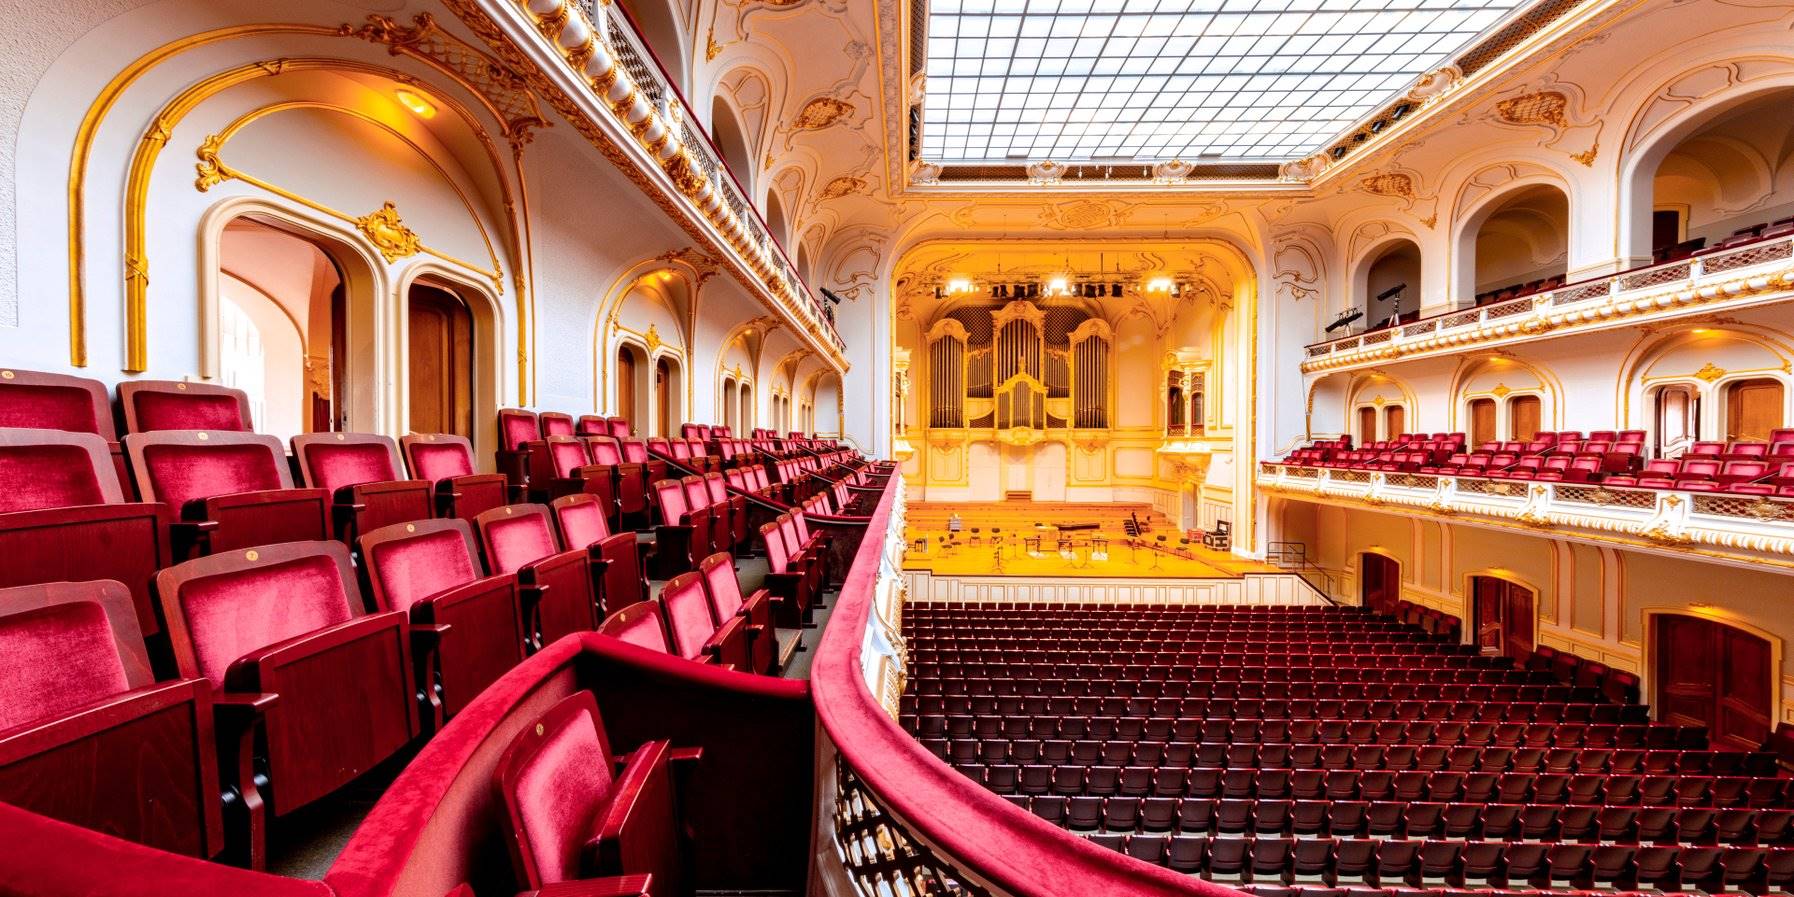 18-mind-blowing-facts-about-laeiszhalle